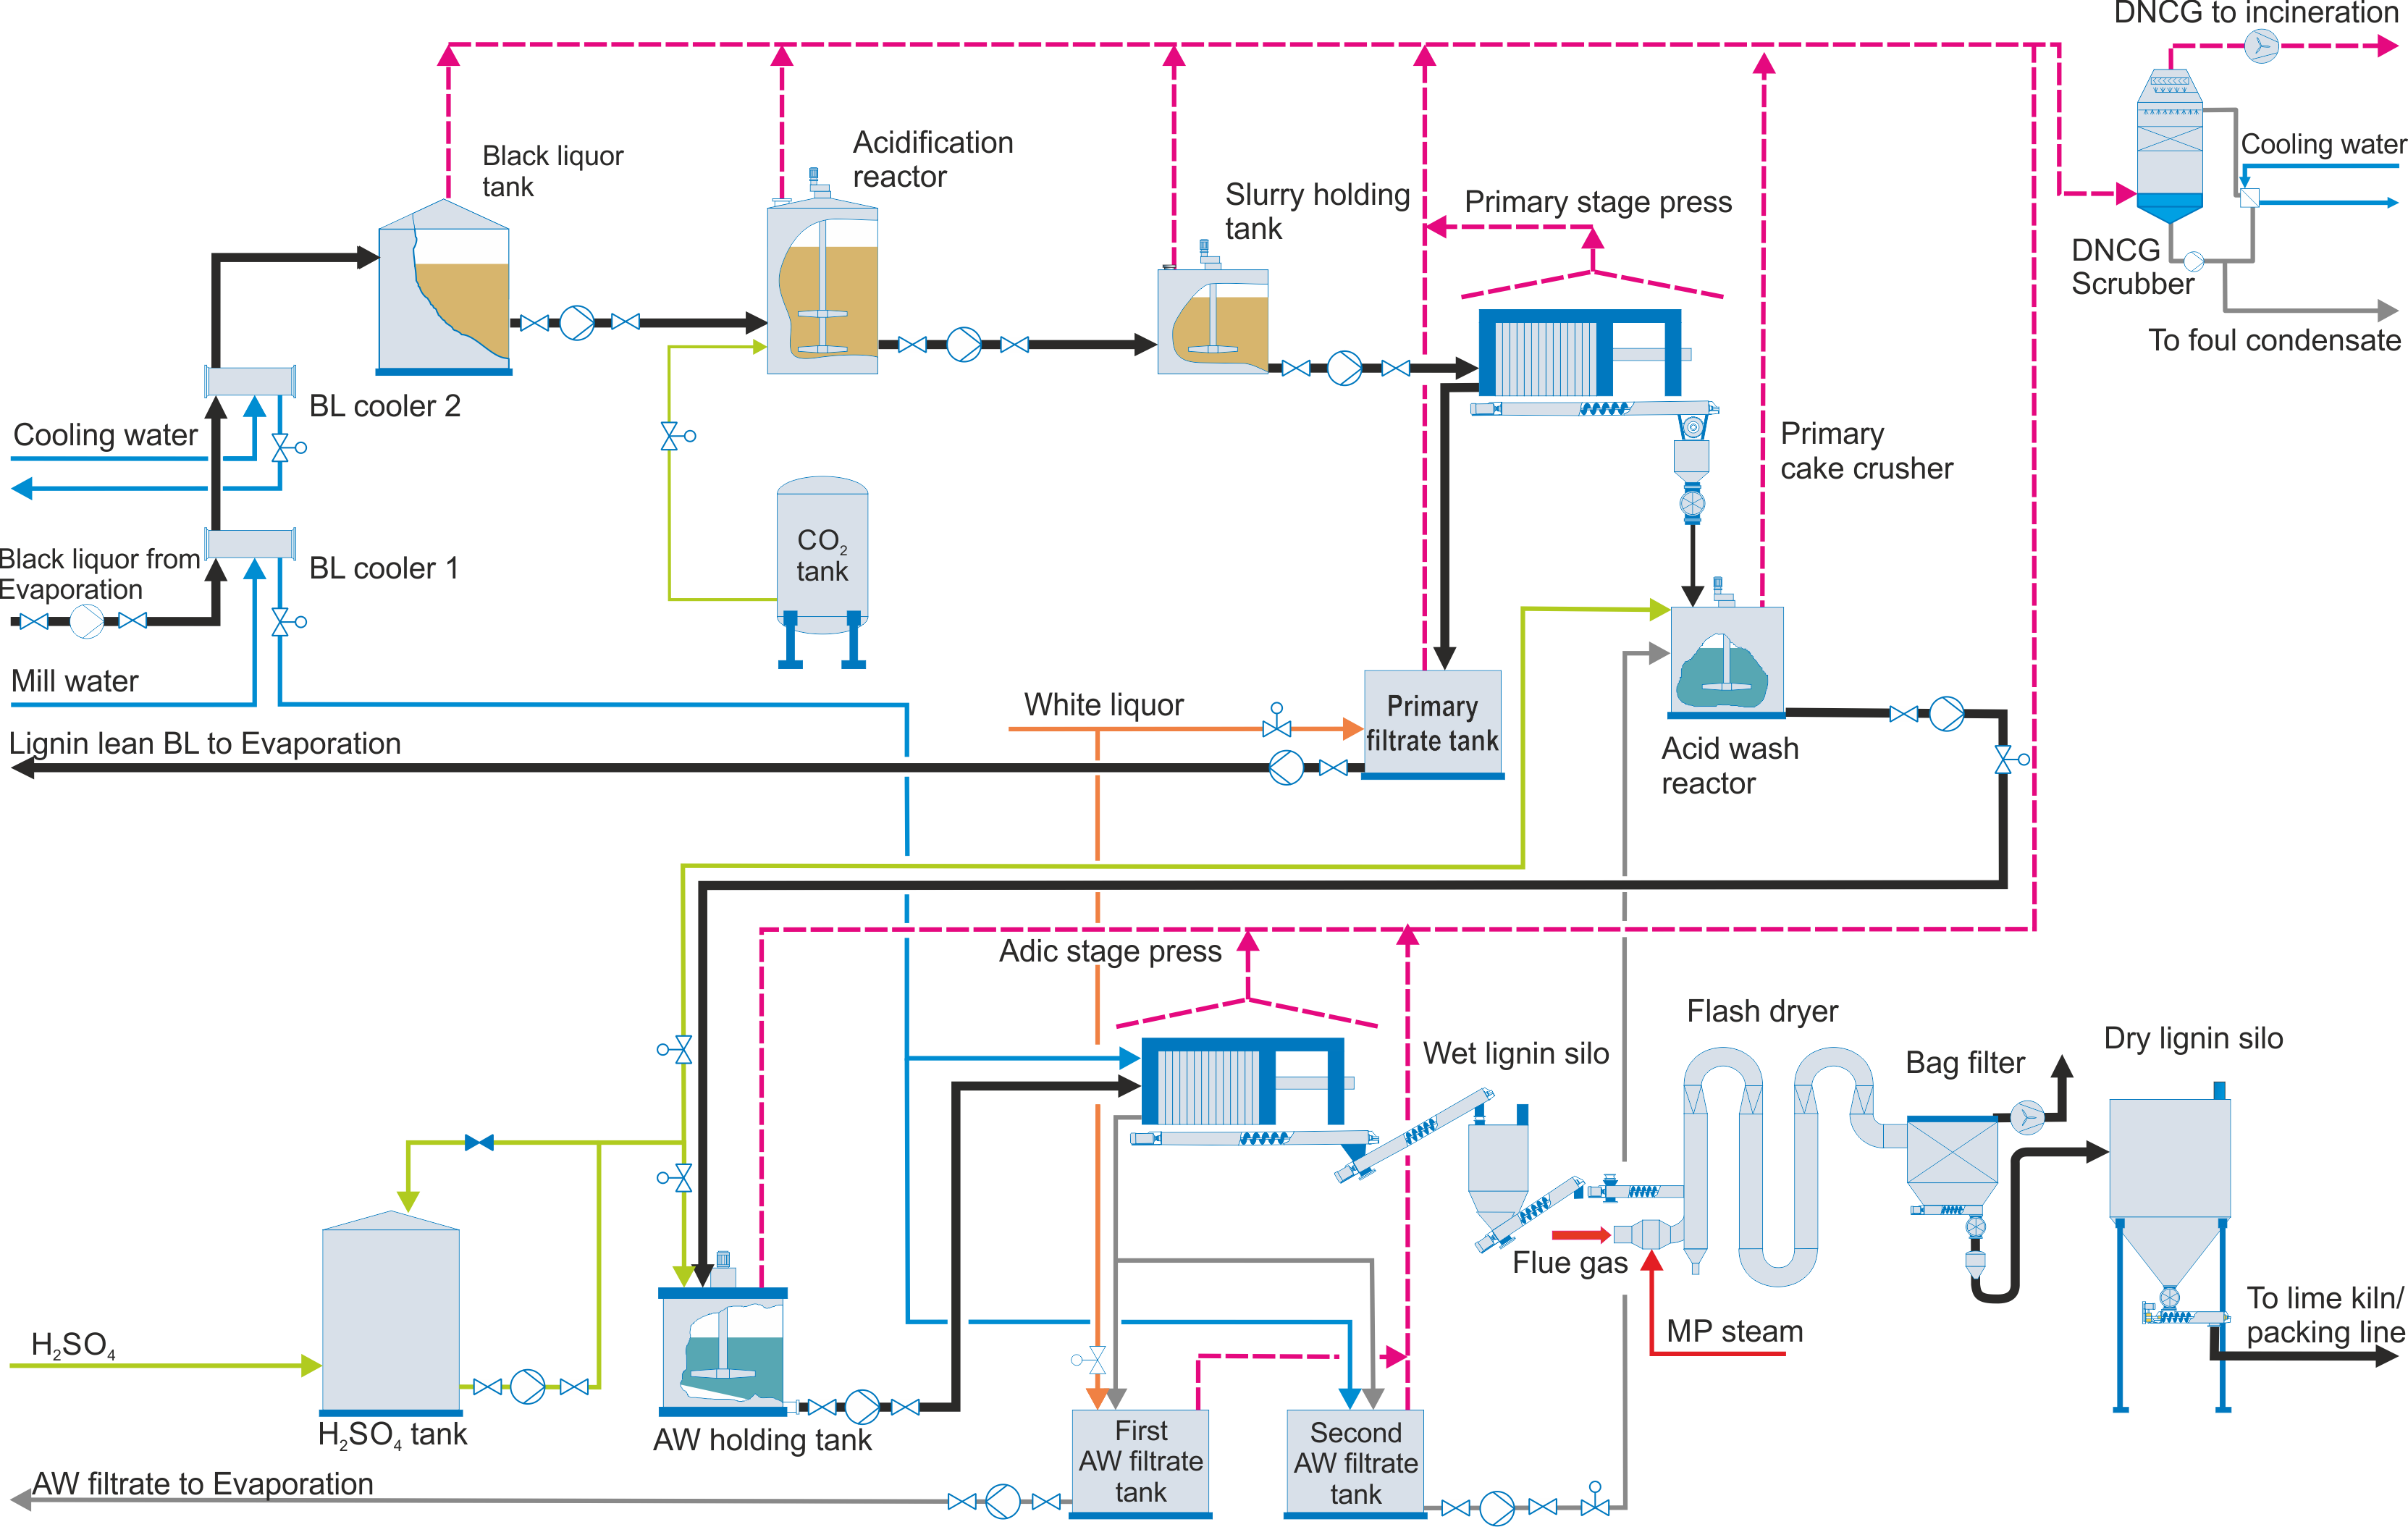 Flowsheet of ANDRITZ lignin recovery process 